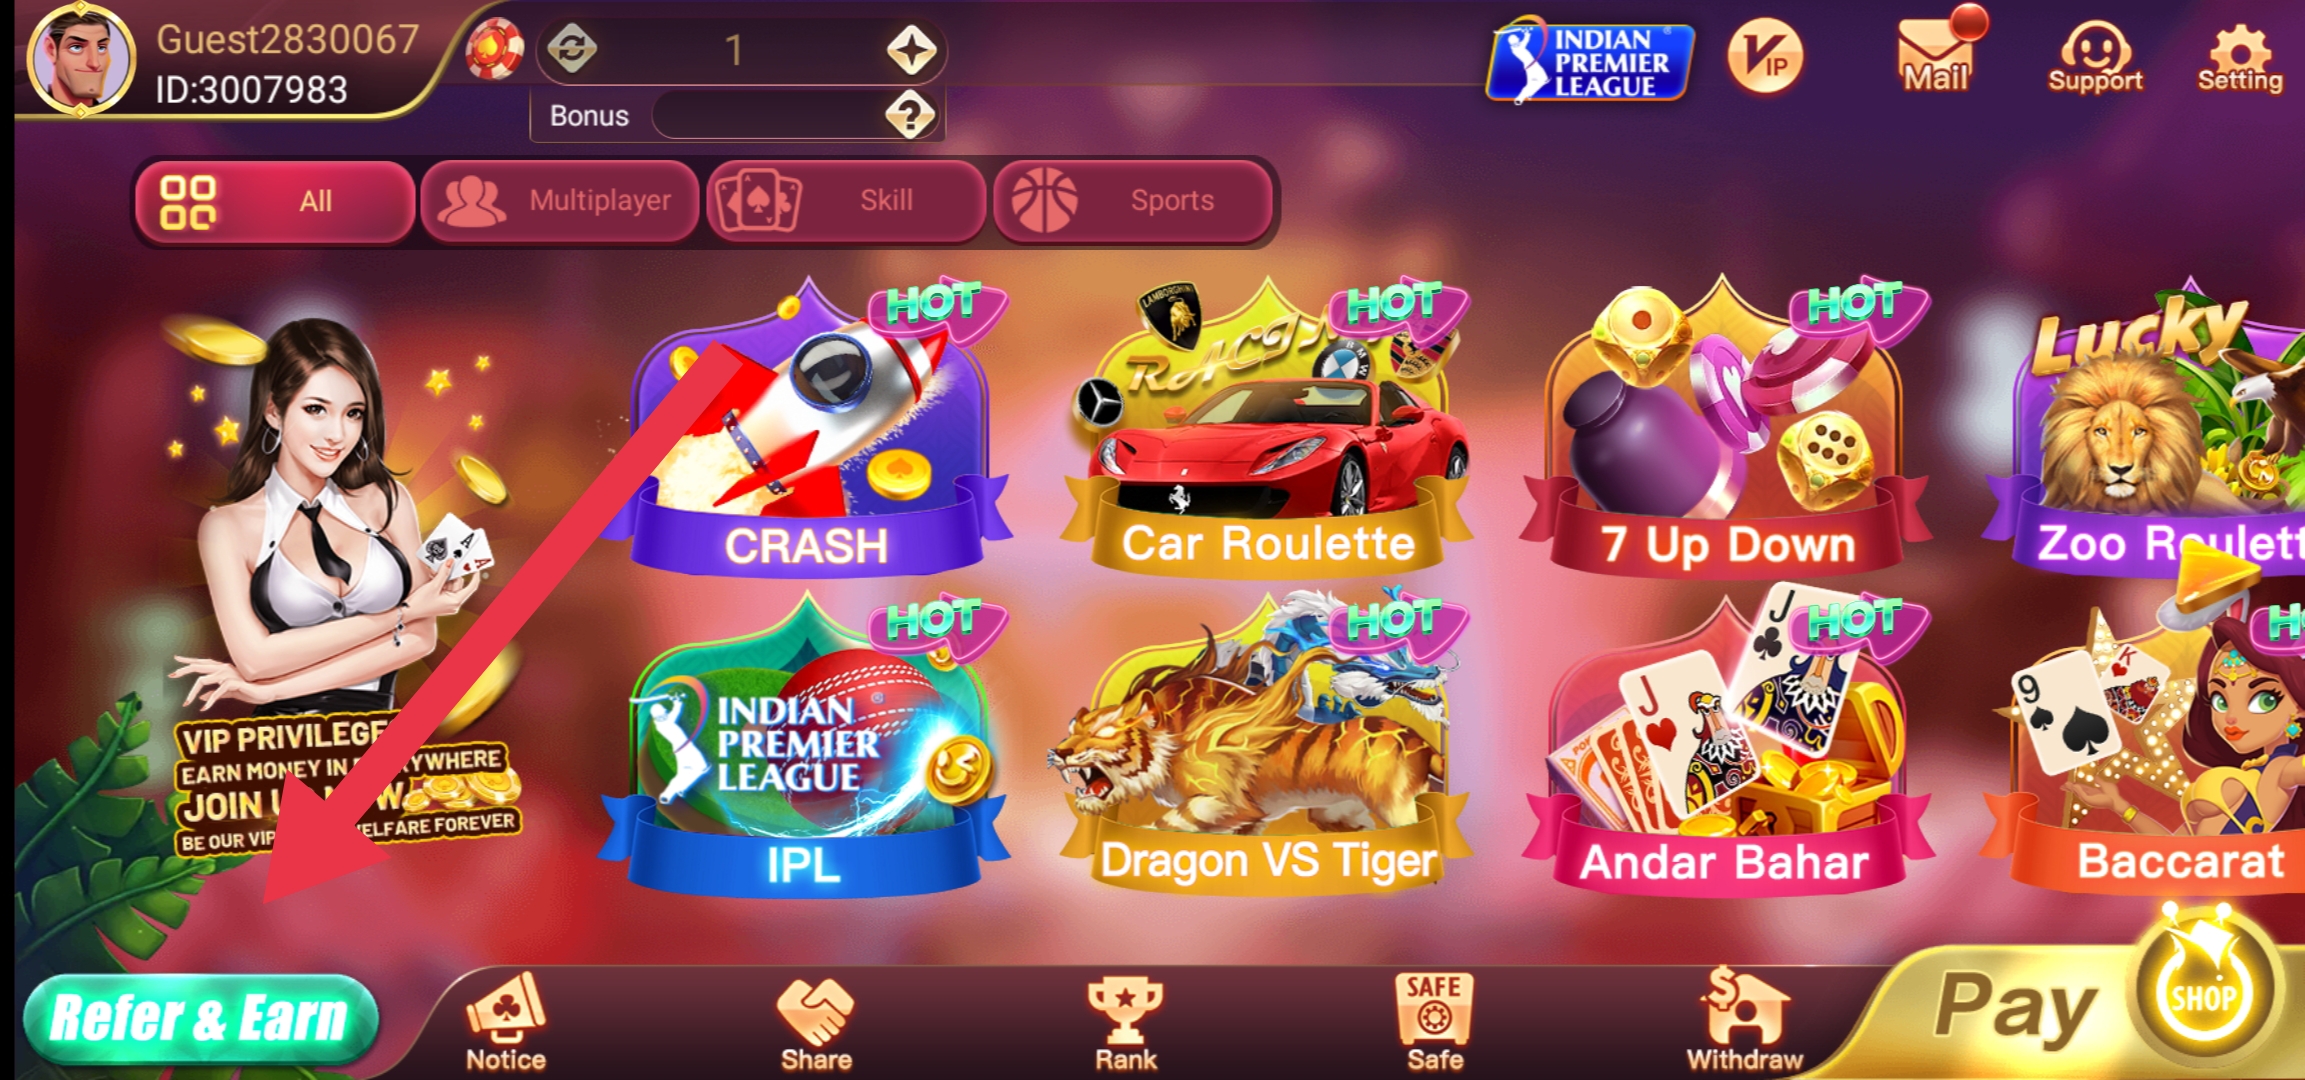 Refer and earn Rummy Loot